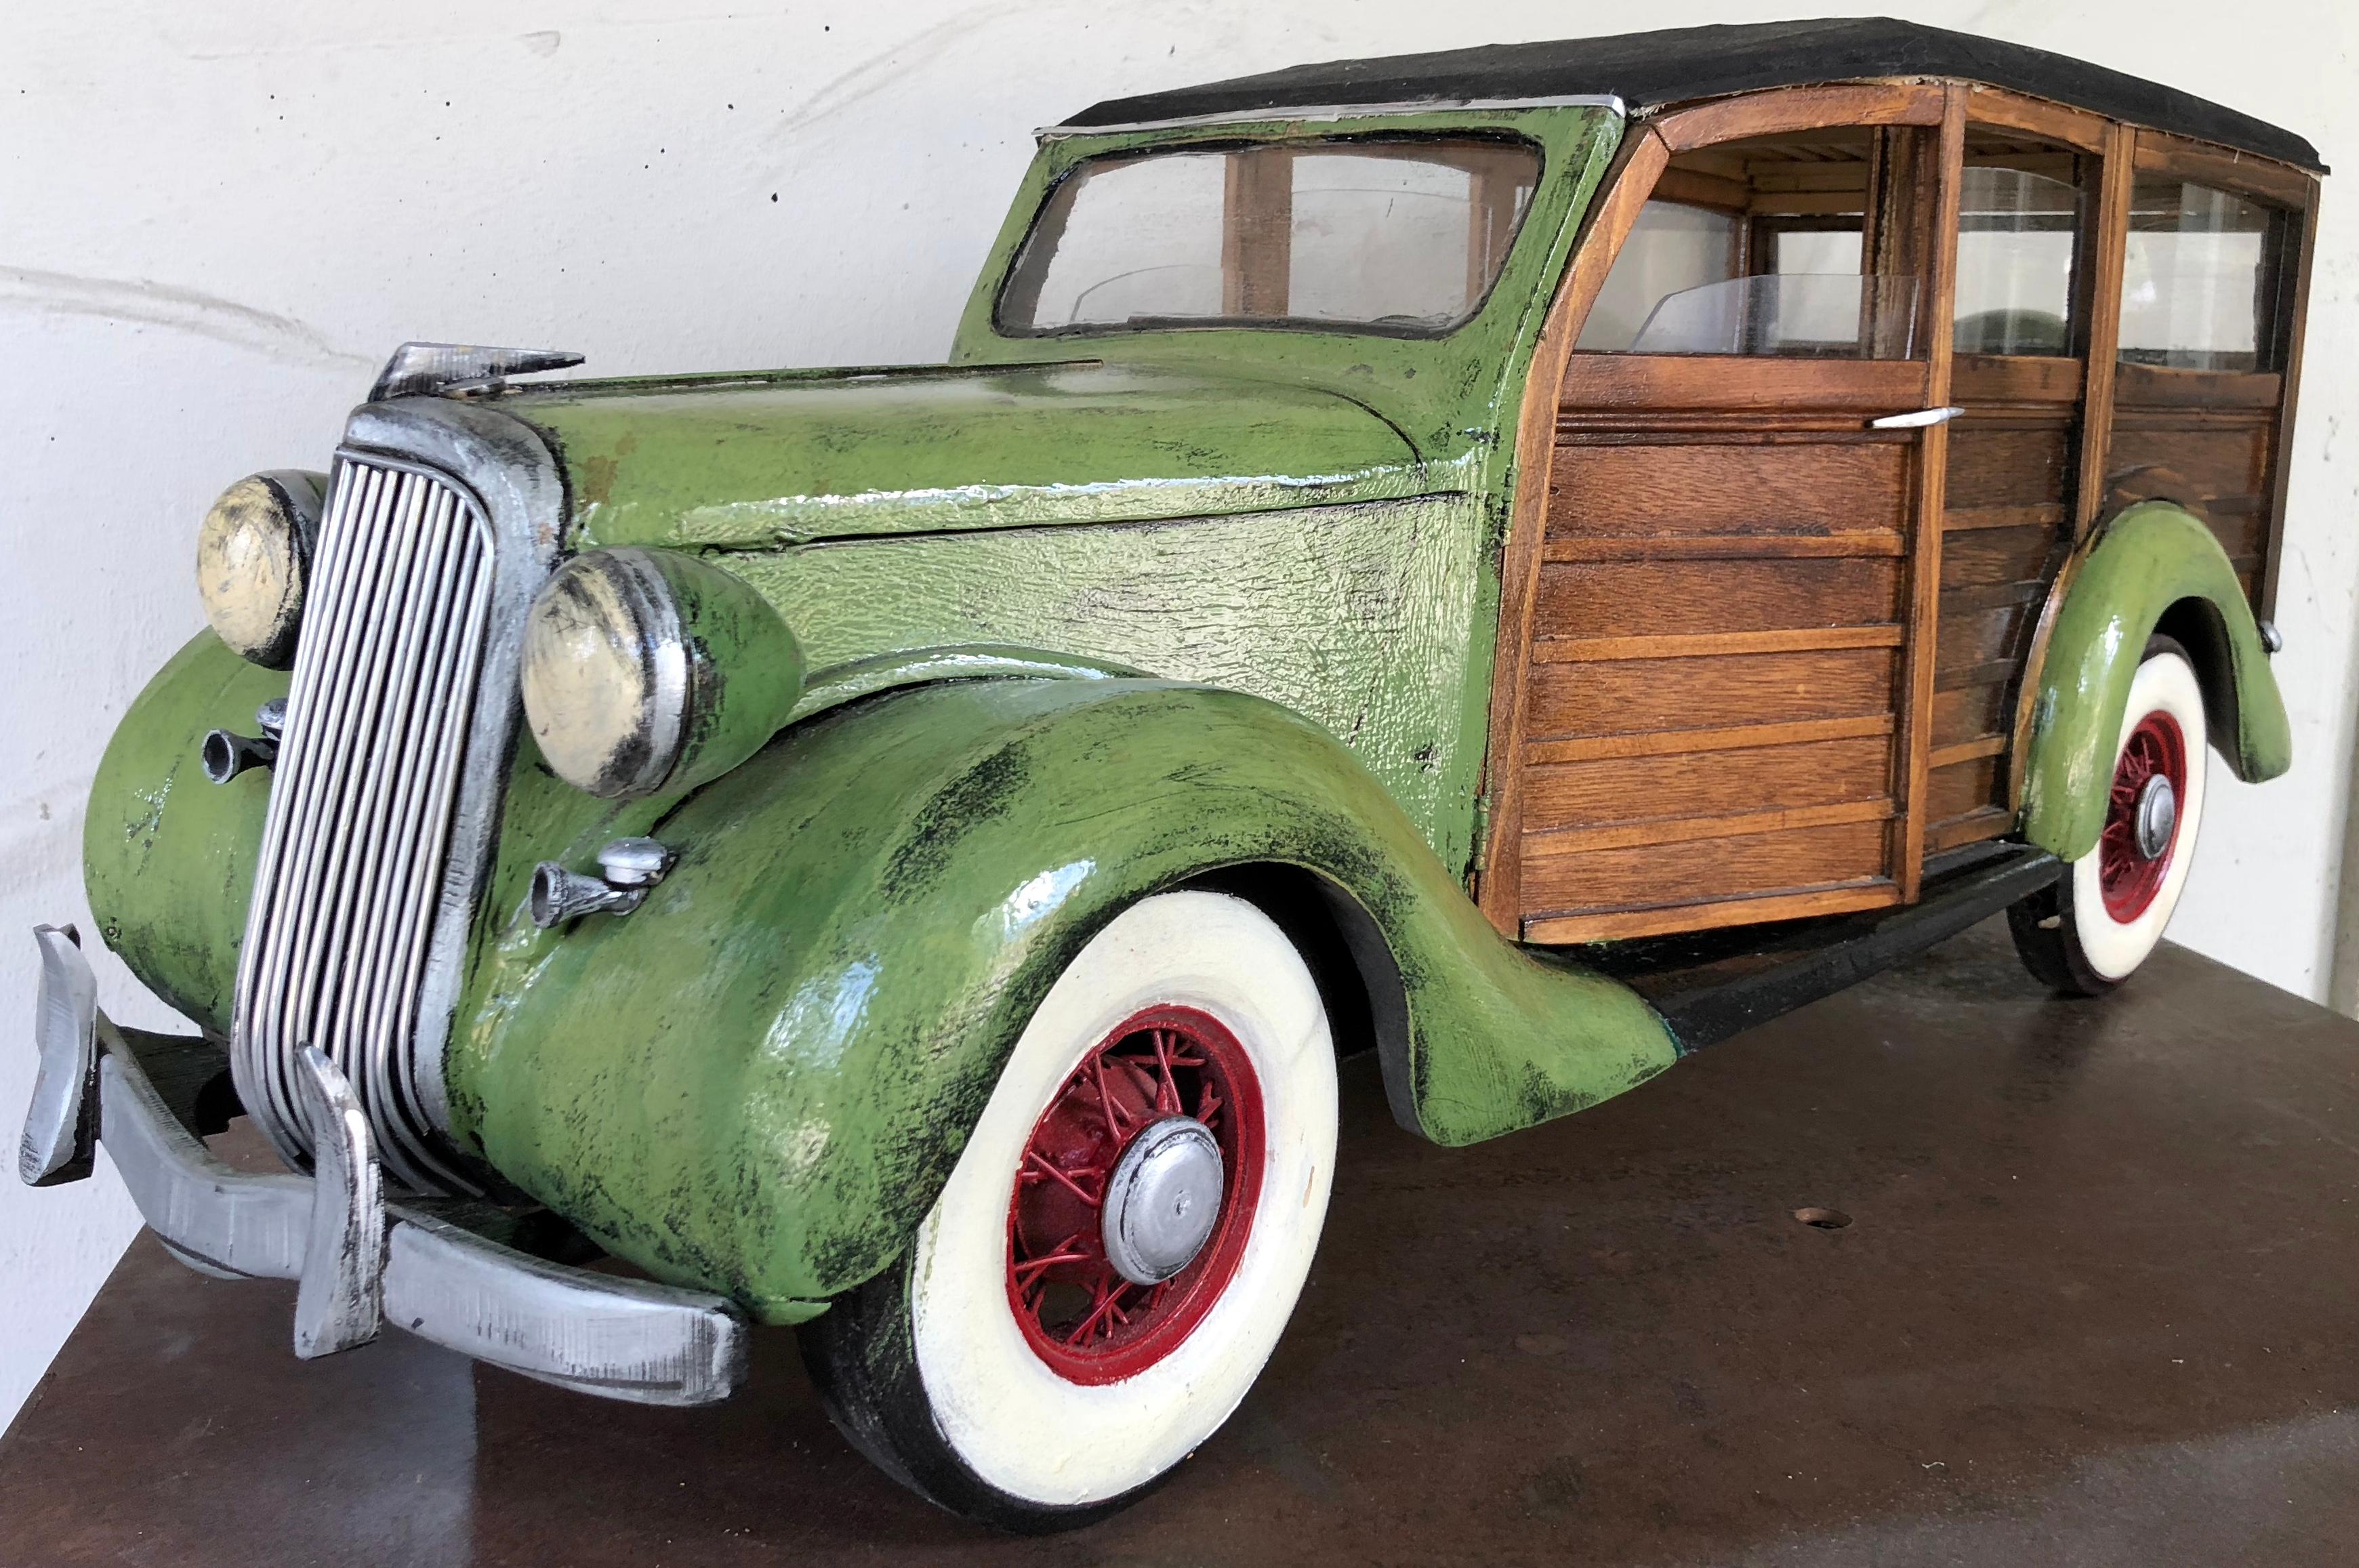 One of a kind large-scale wood and painted sculpture or an iconic car.